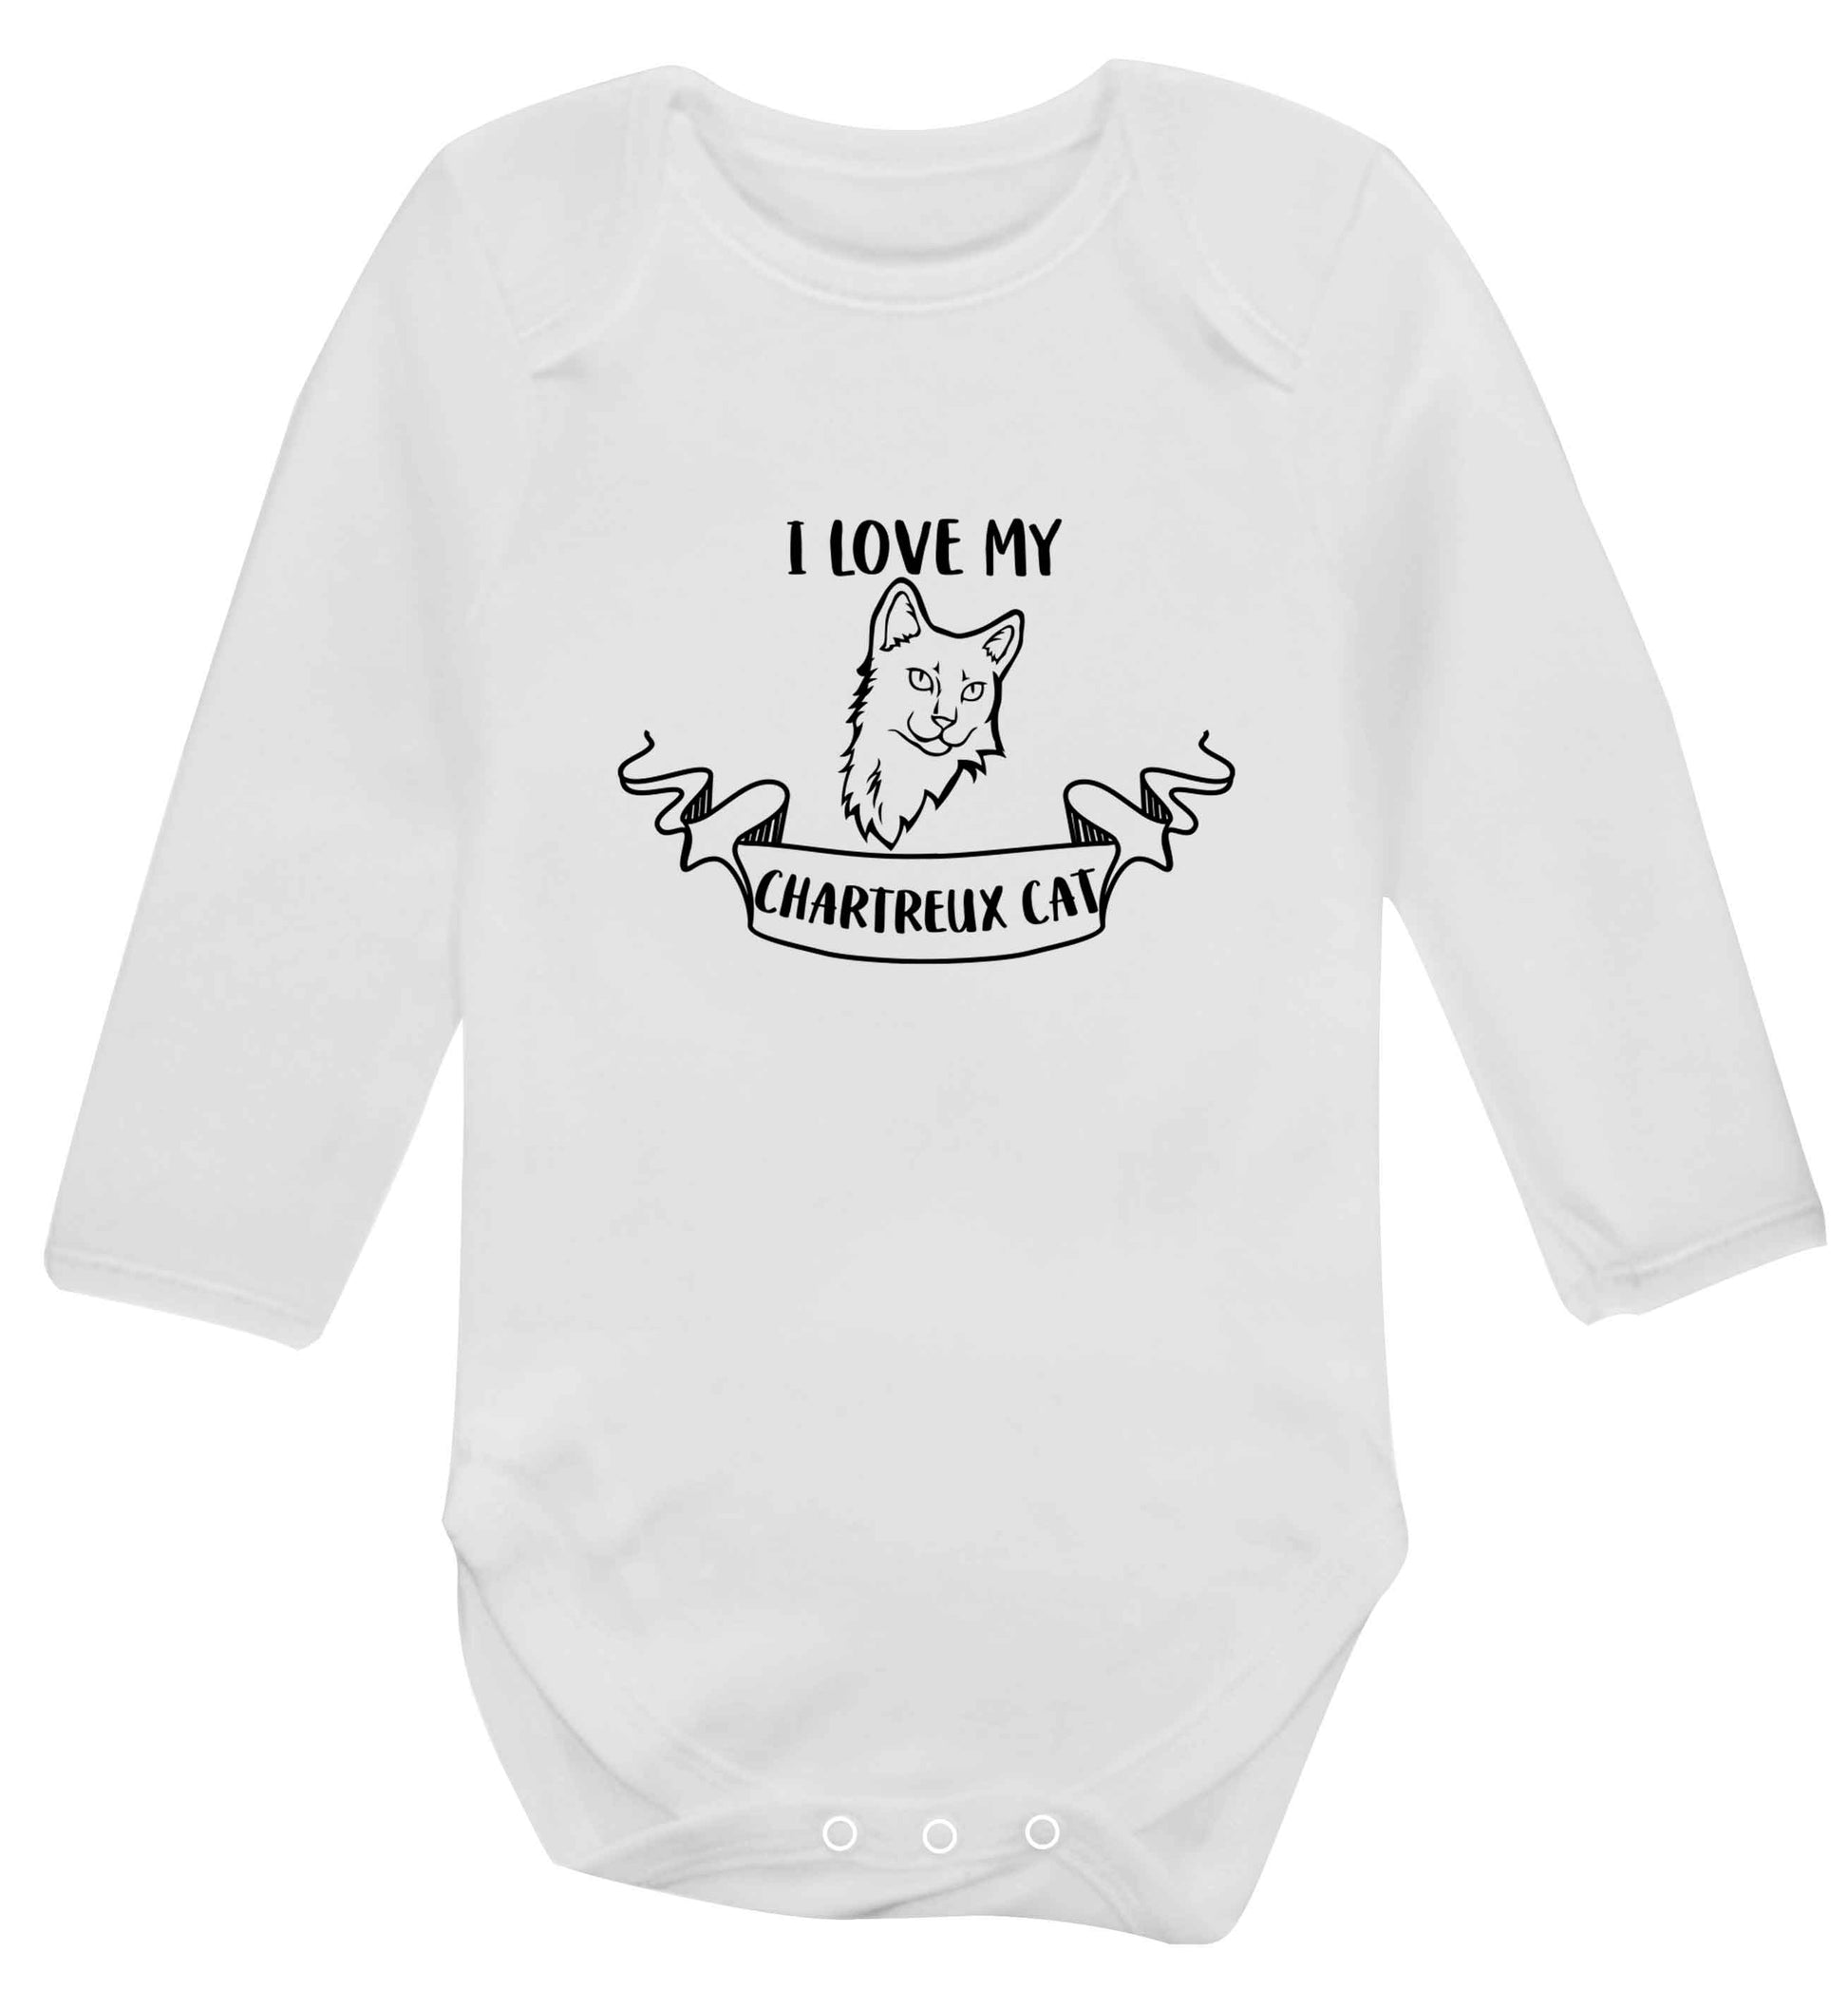 I love my chartreux cat baby vest long sleeved white 6-12 months